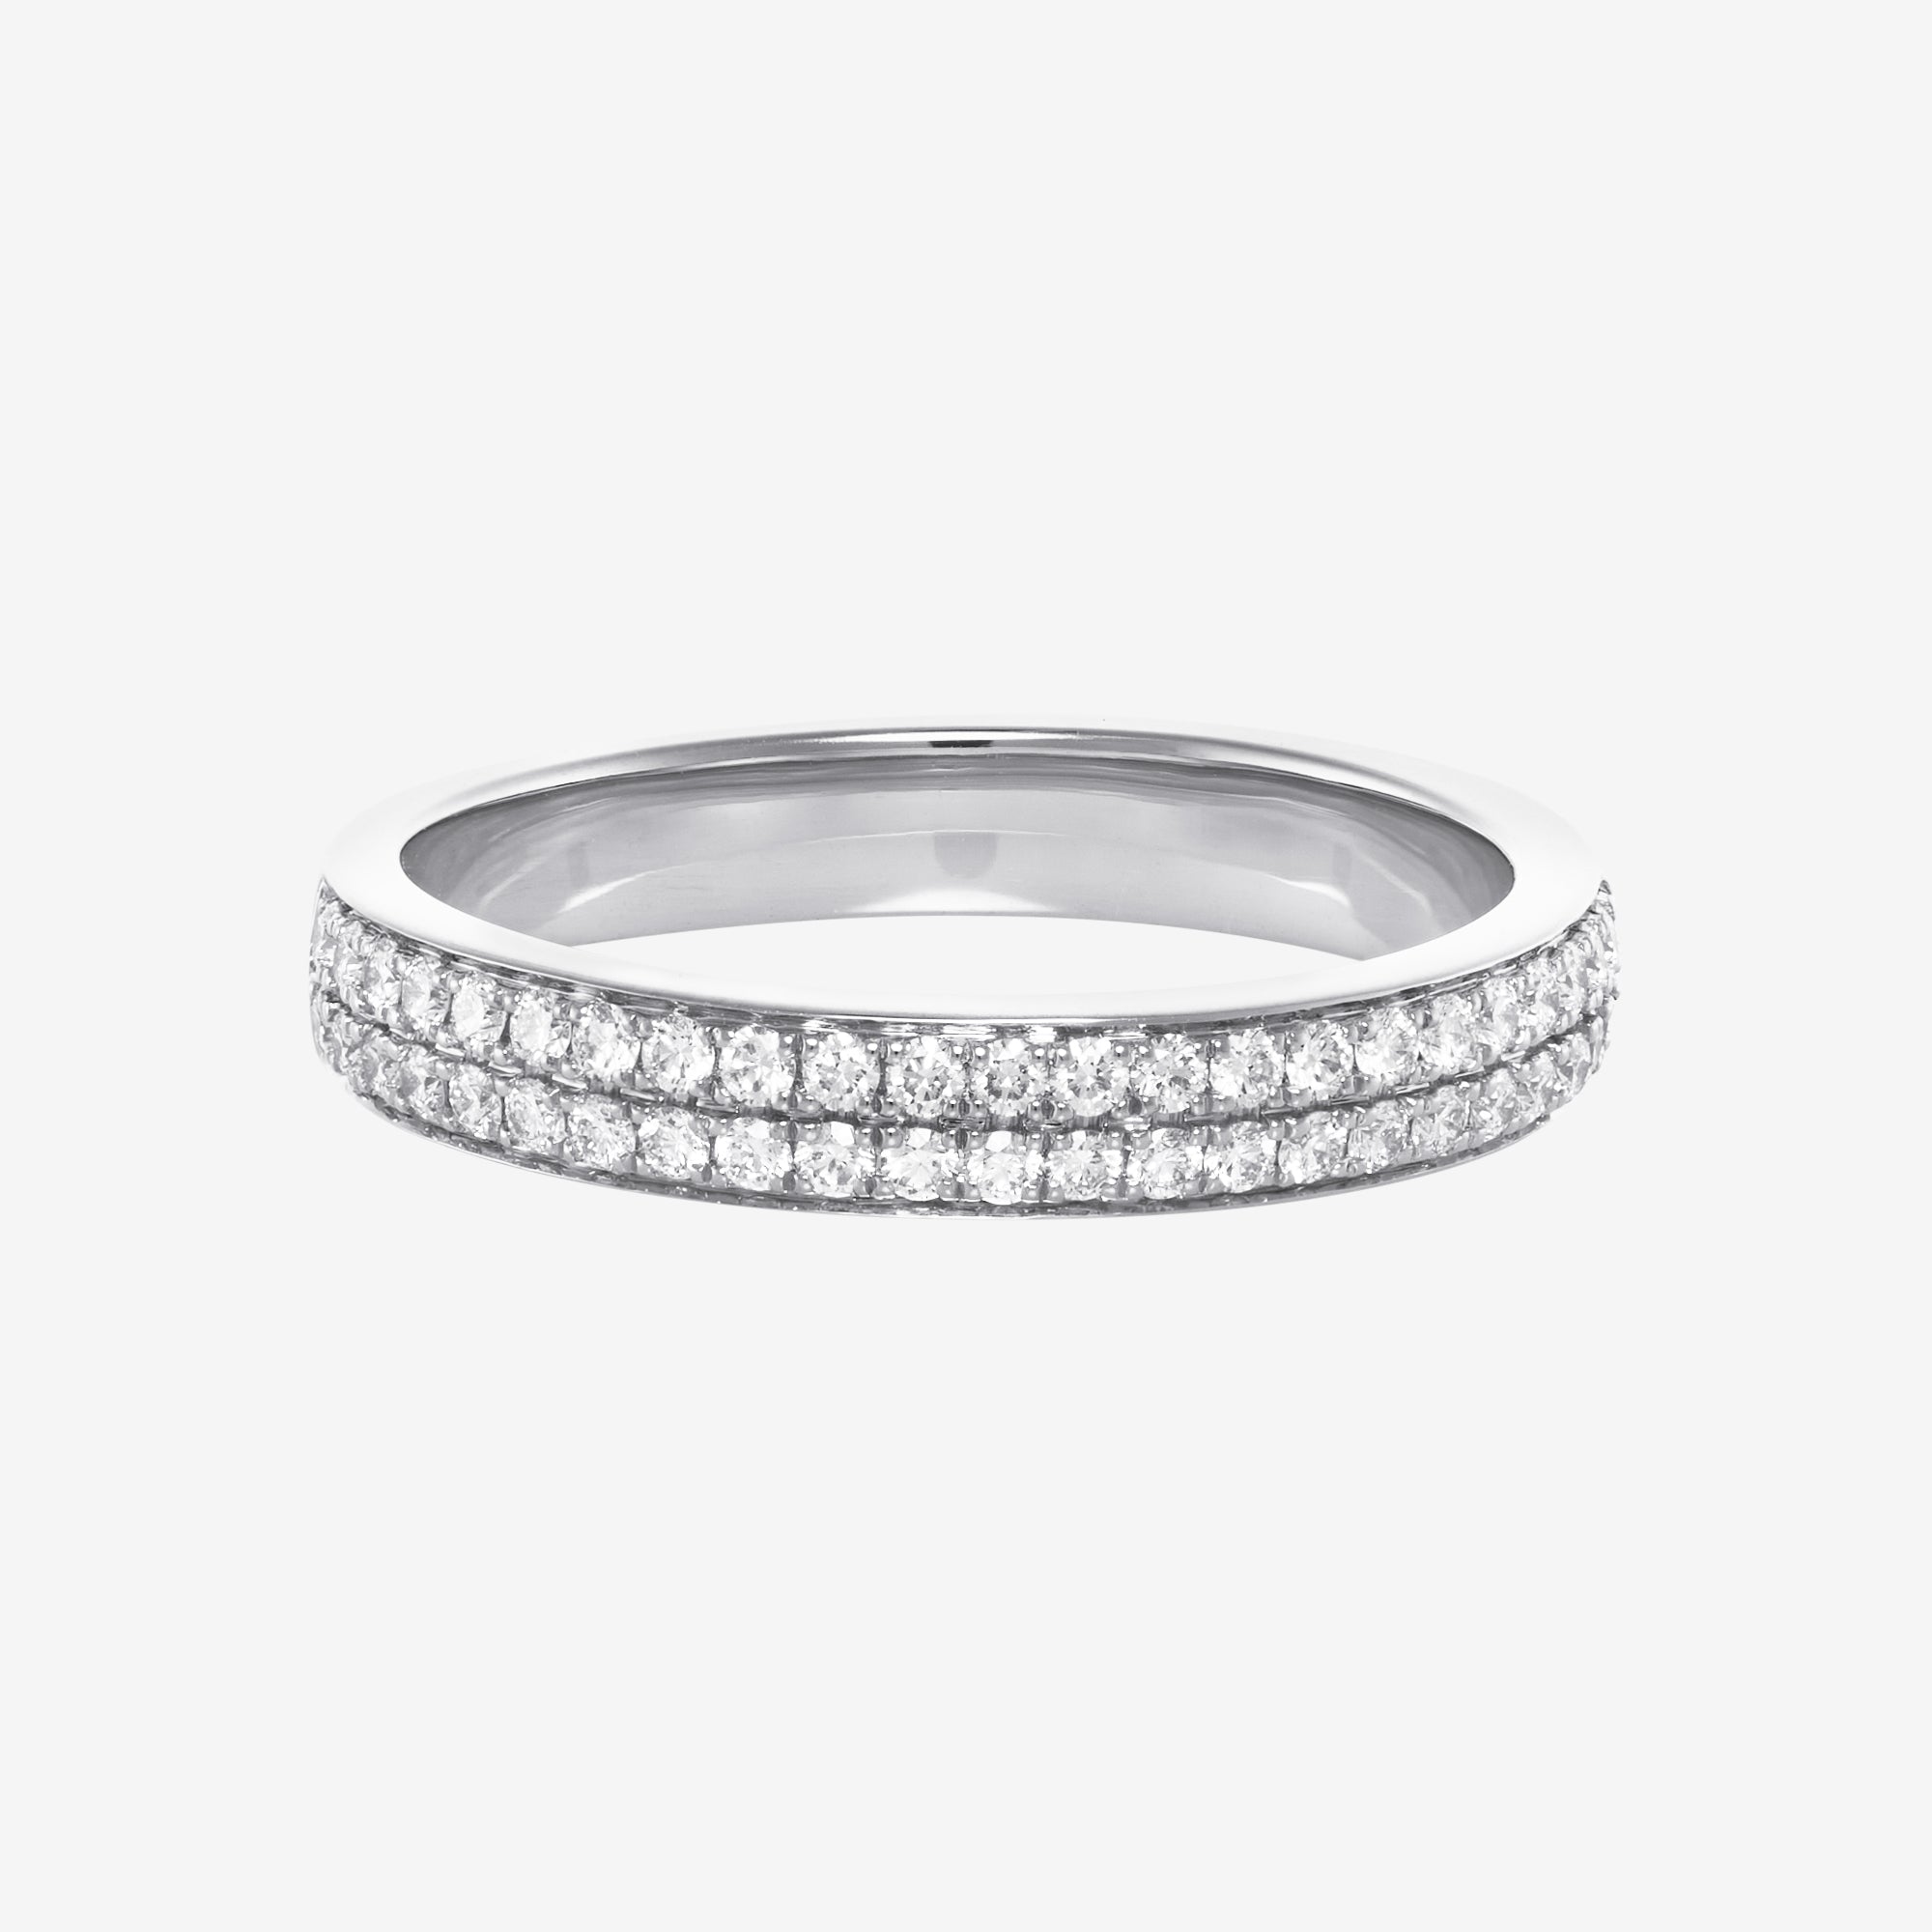 The One Bold Pavé Ring